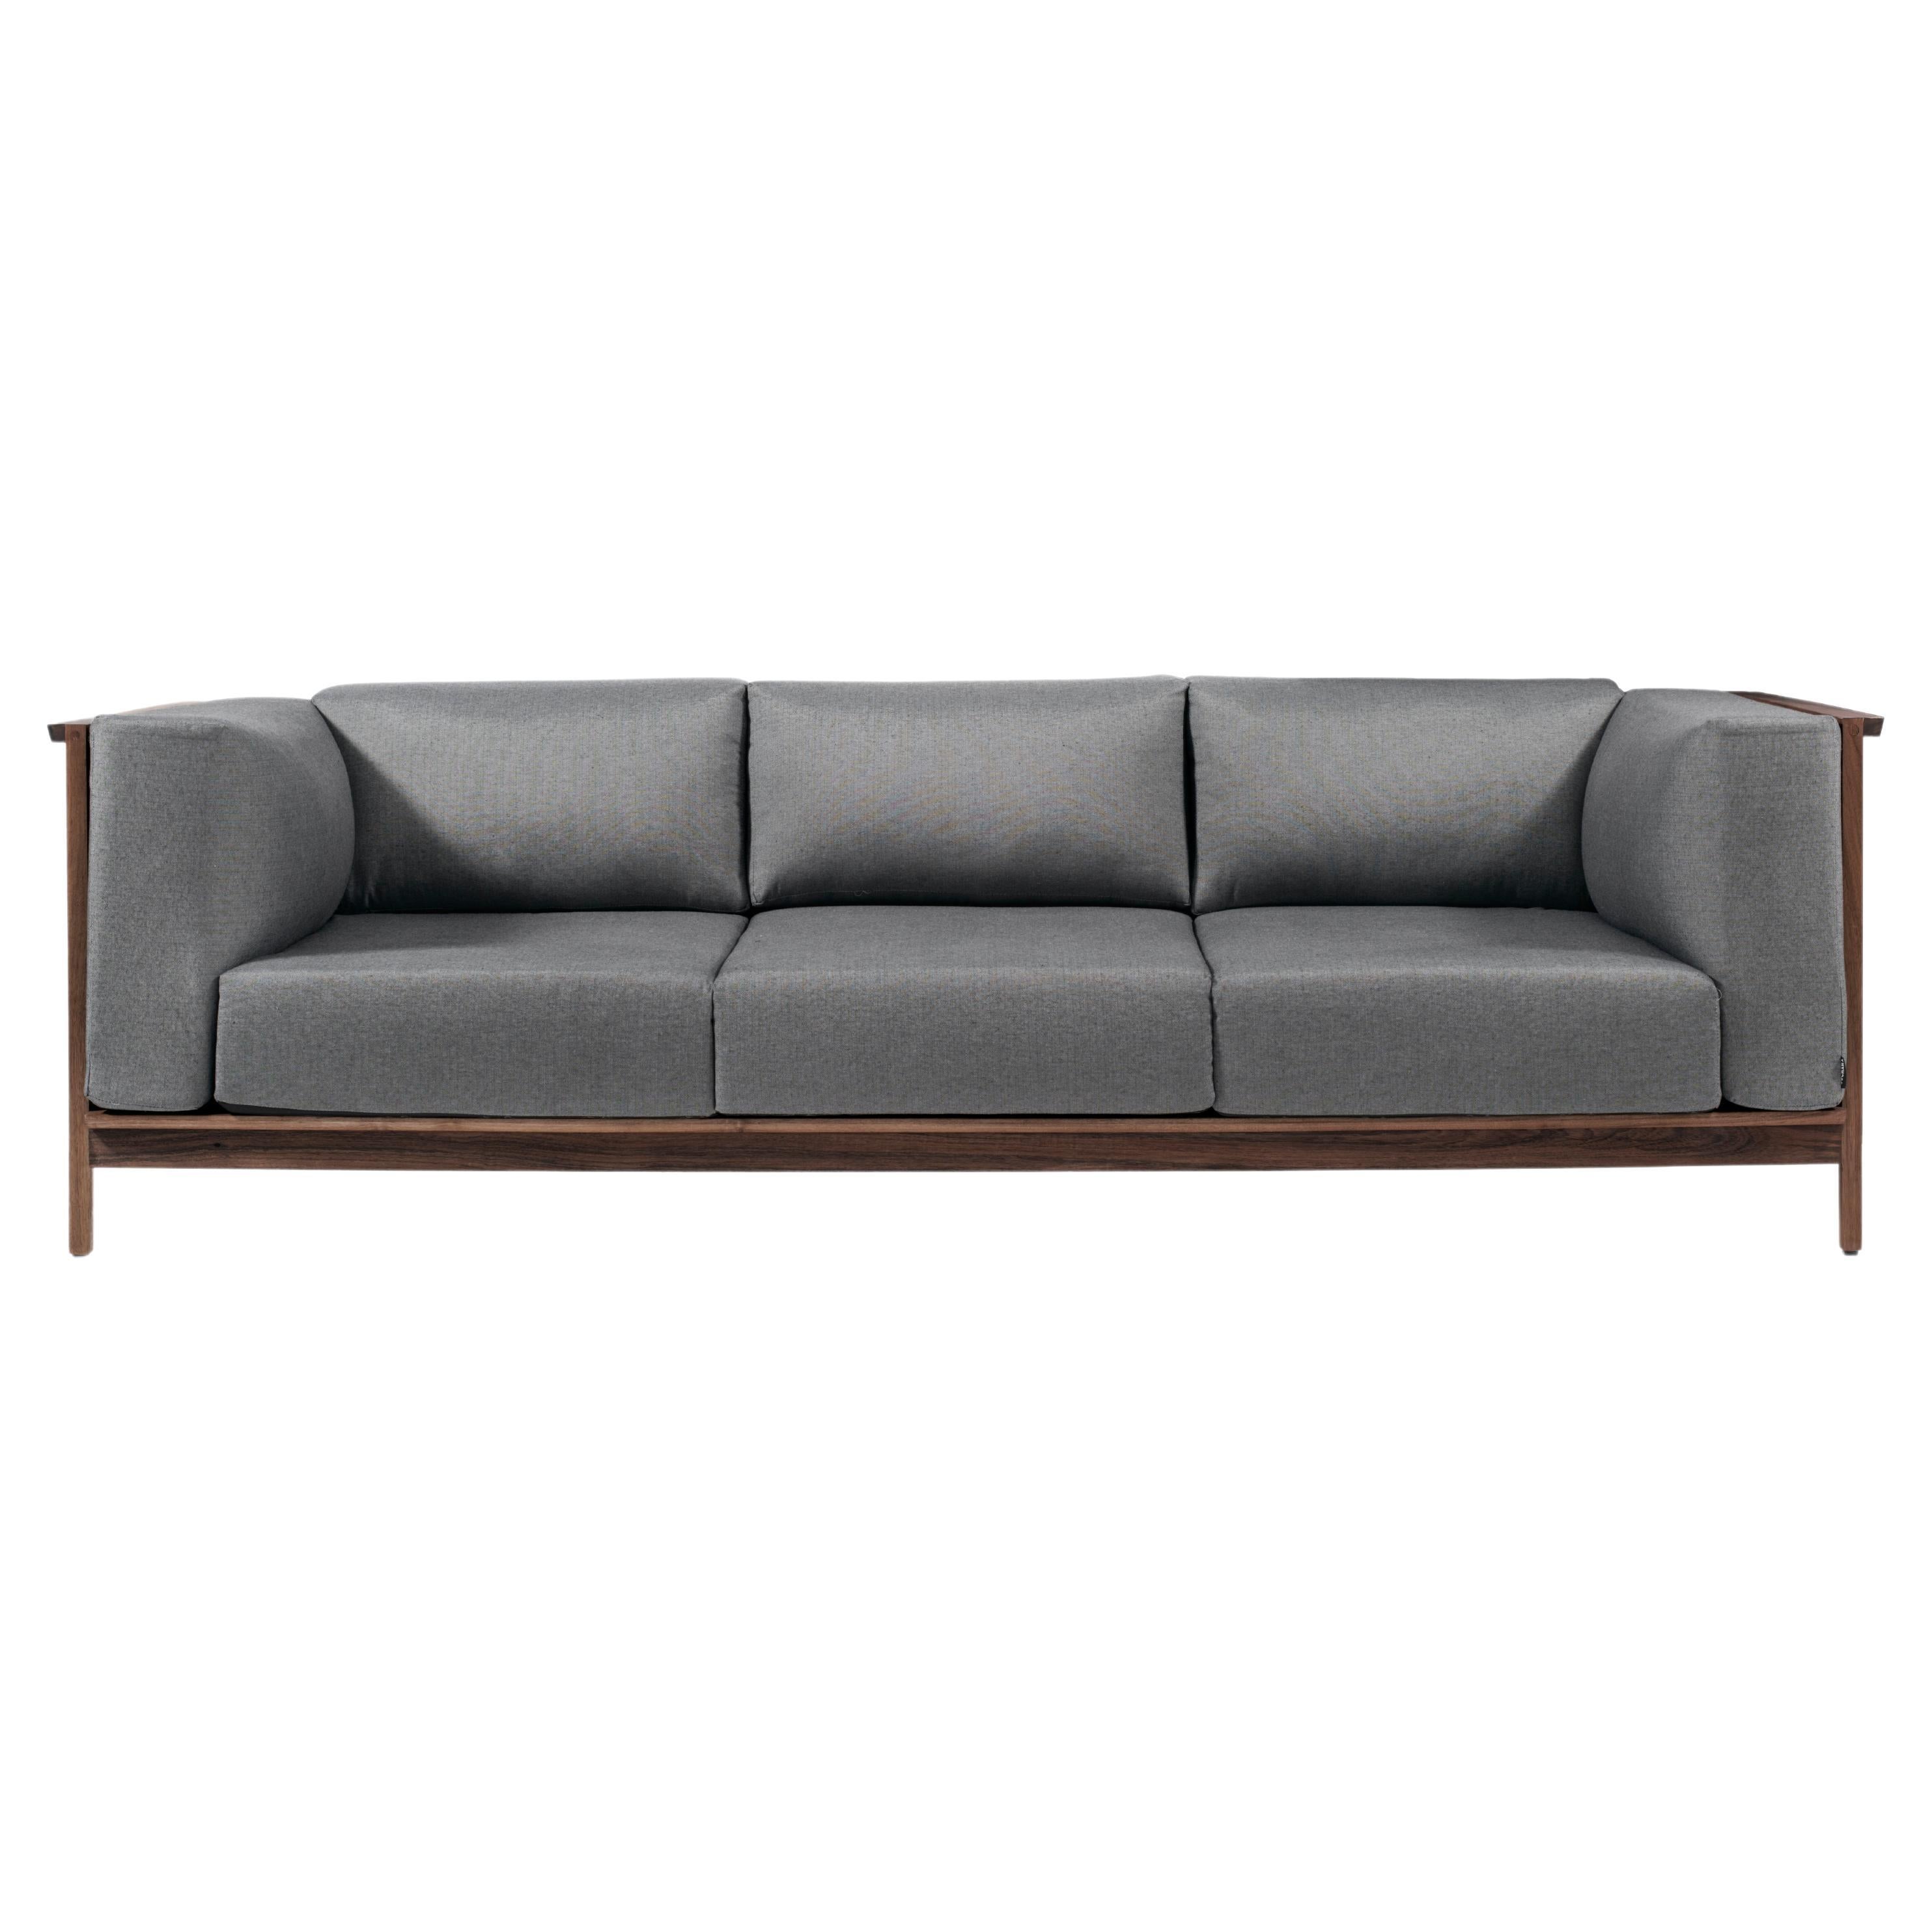 Tres Plazas Confort, Mexican Contemporary Sofa by Emiliano Molina for Cuchara For Sale